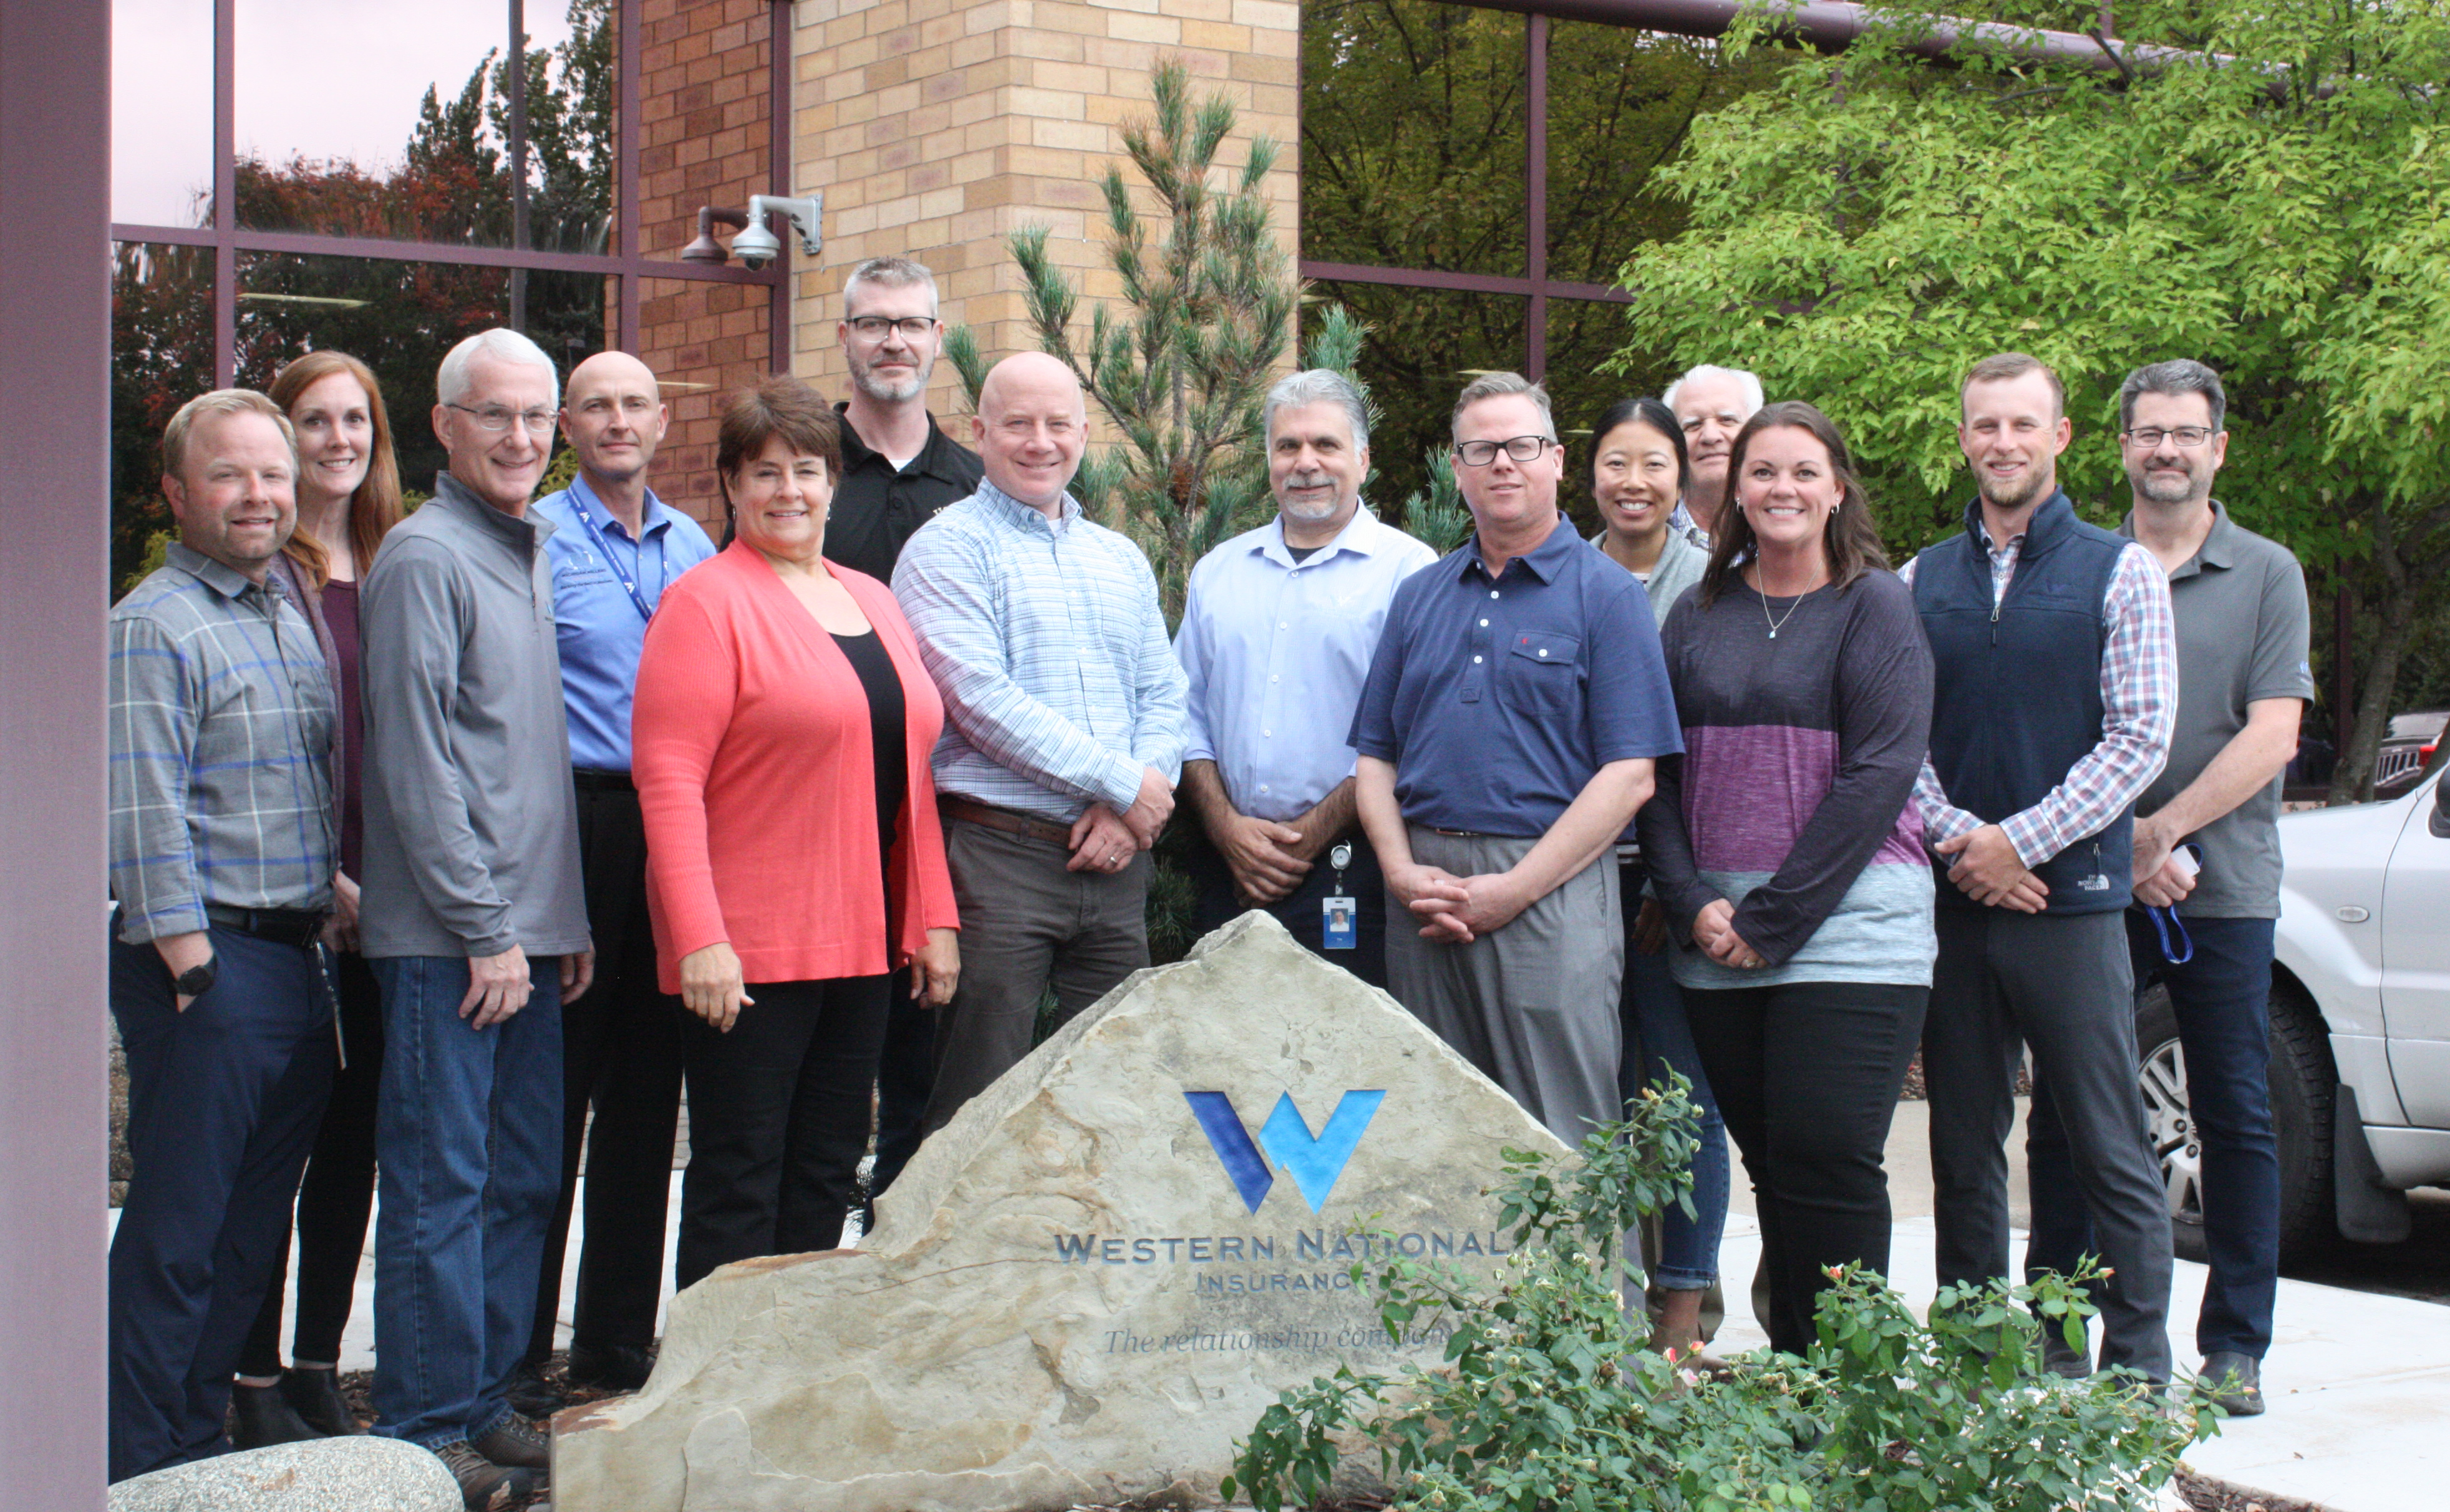 The Western National Insurance Group Loss Control group smiling for a for outside of our Edina, MN office.